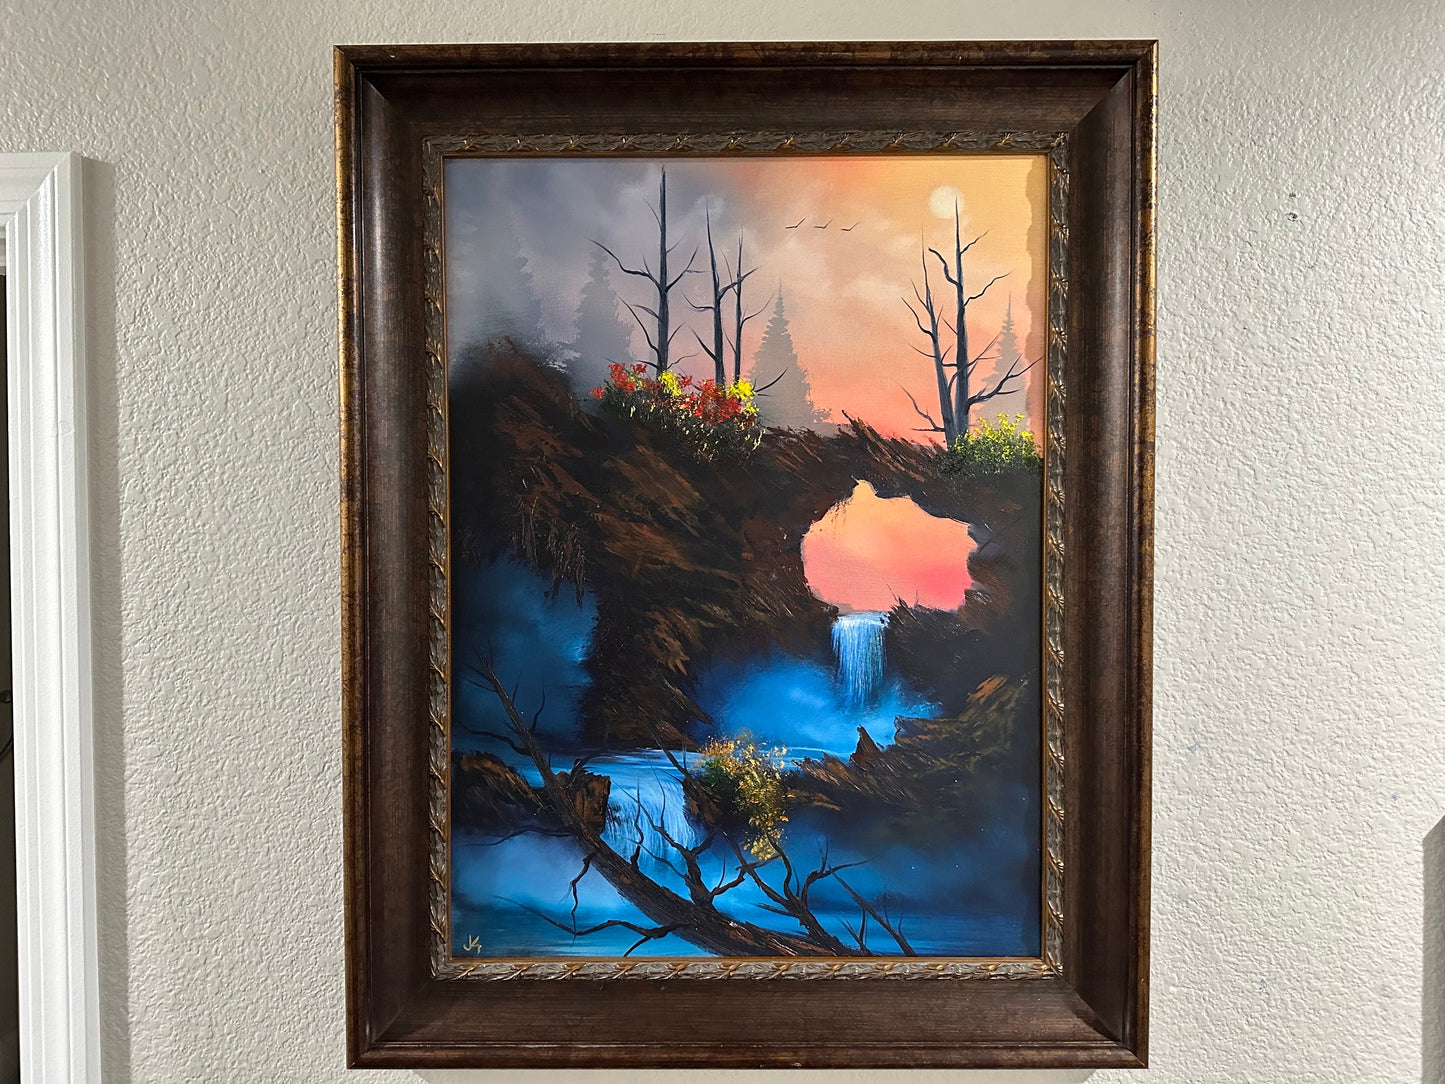 Painting 822 - 18x24" Sunset Canyon Waterfall with Heavy-duty Frame Painted Live at City of the World Art Gallery 6/17/23 by PaintWithJosh